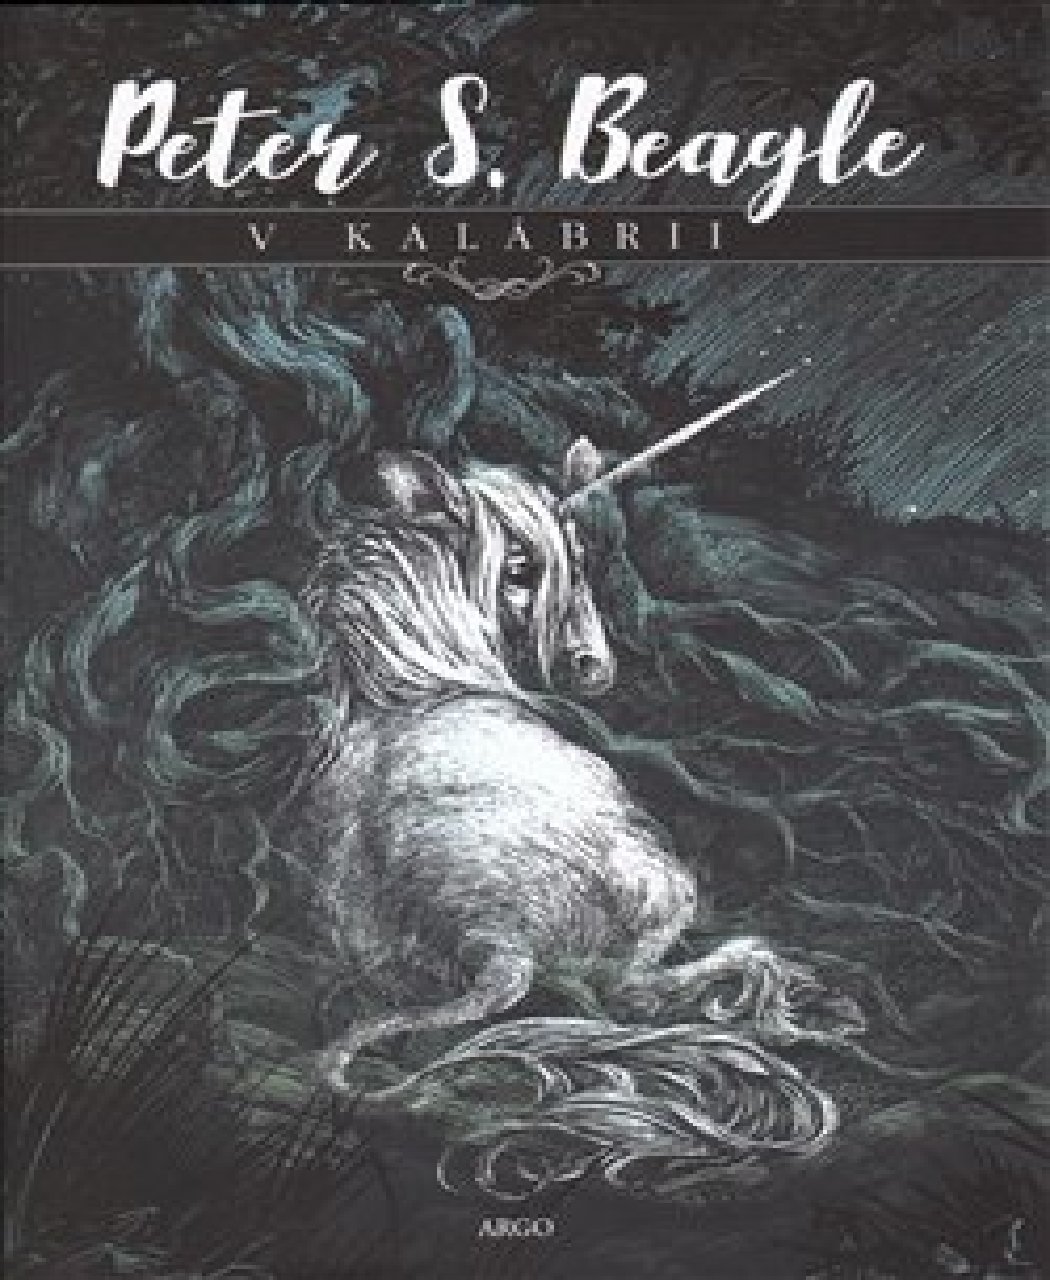 in calabria by peter s beagle